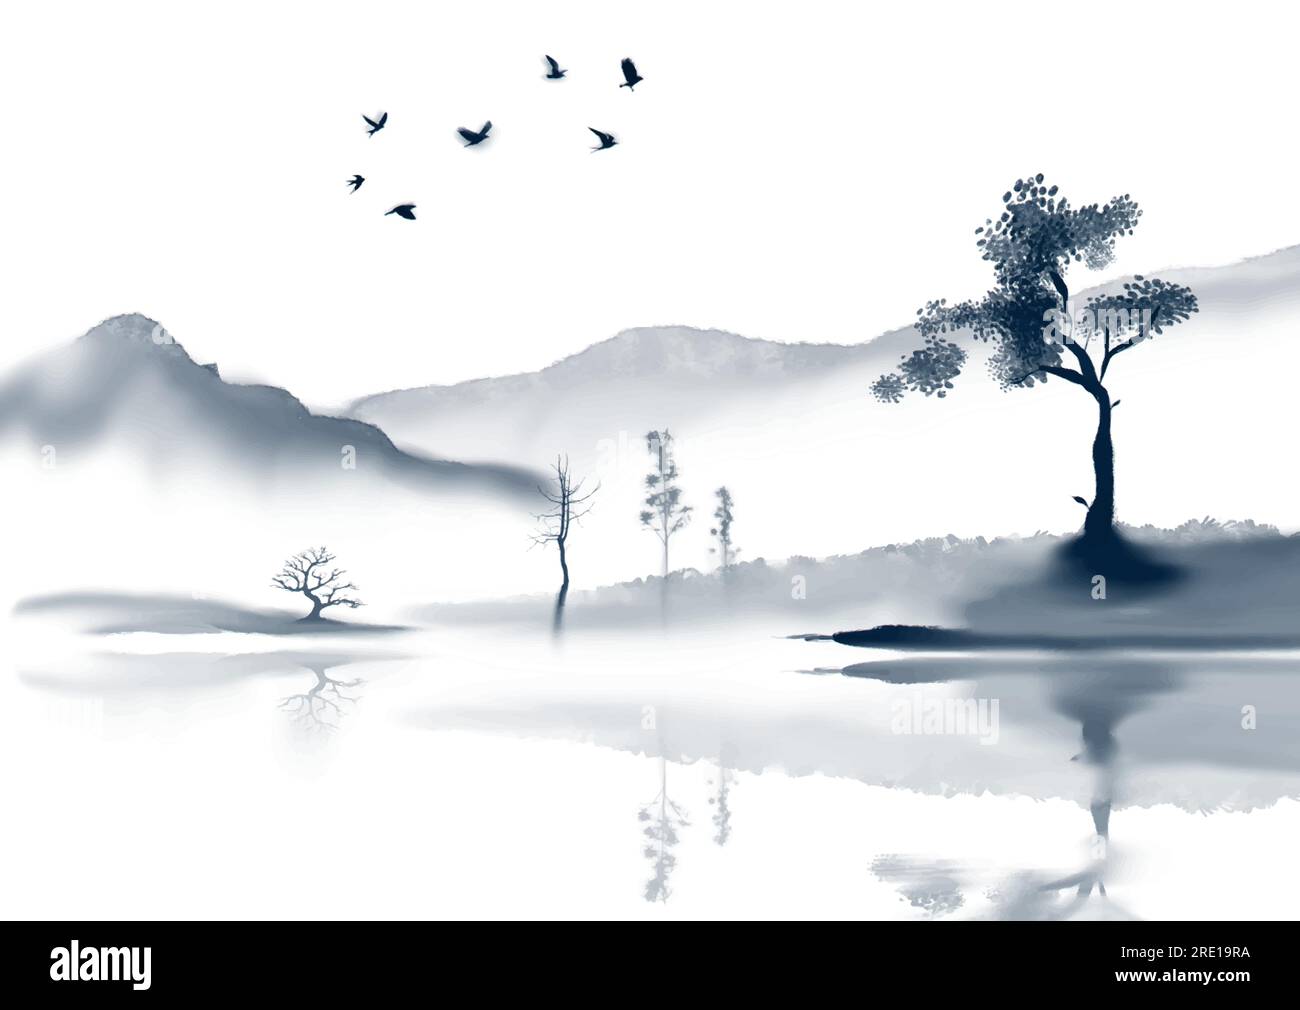 Hand painted japanese themed landscape design Stock Vector